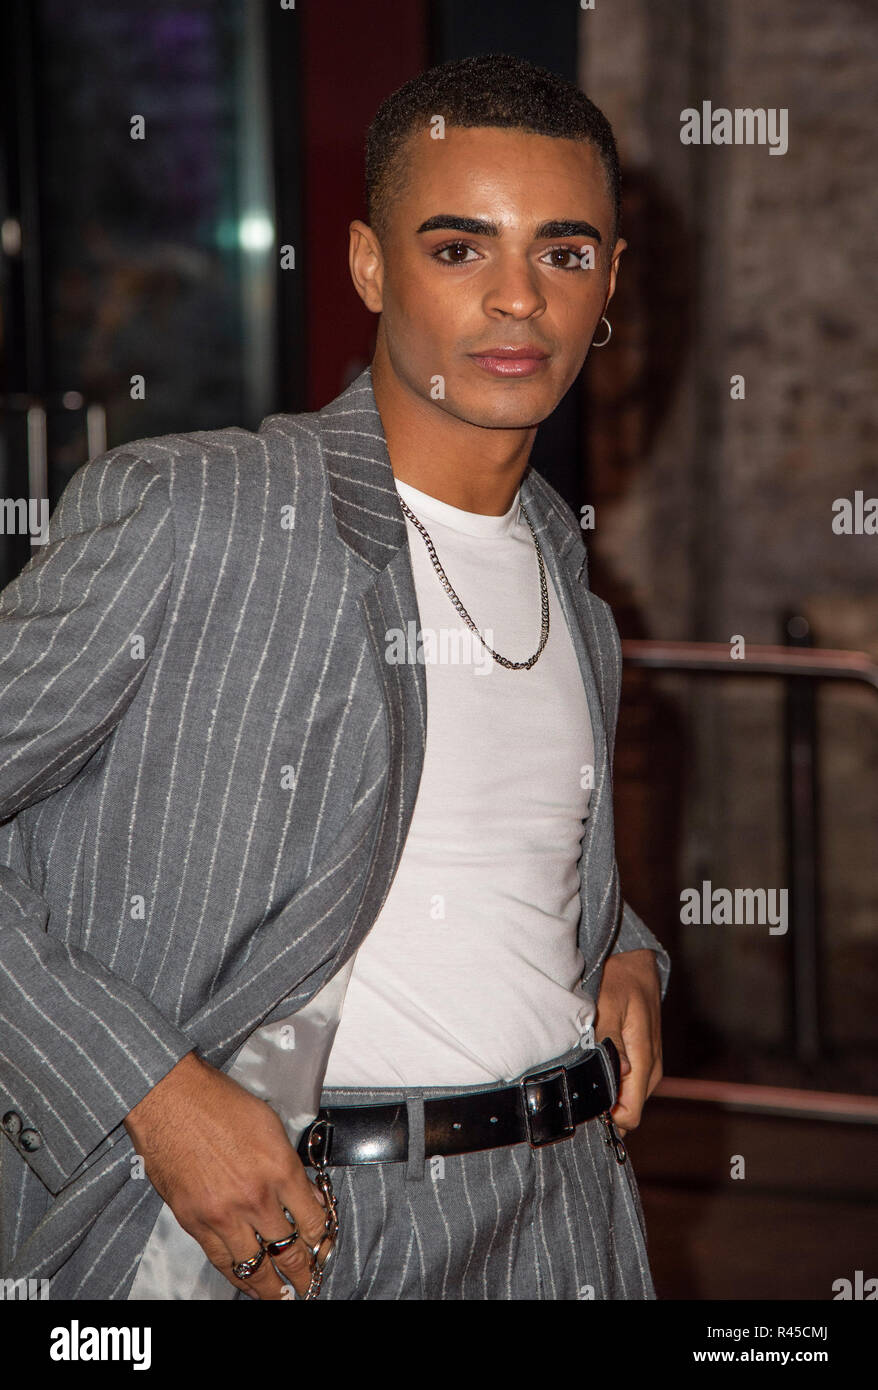 LONDON, ENGLAND - NOVEMBER 25:  Layton Williams attends The British Academy Children's Awards 2018 at The Roundhouse on November 25, 2018 in London, England. Credit: Gary Mitchell, GMP Media/Alamy Live News Stock Photo